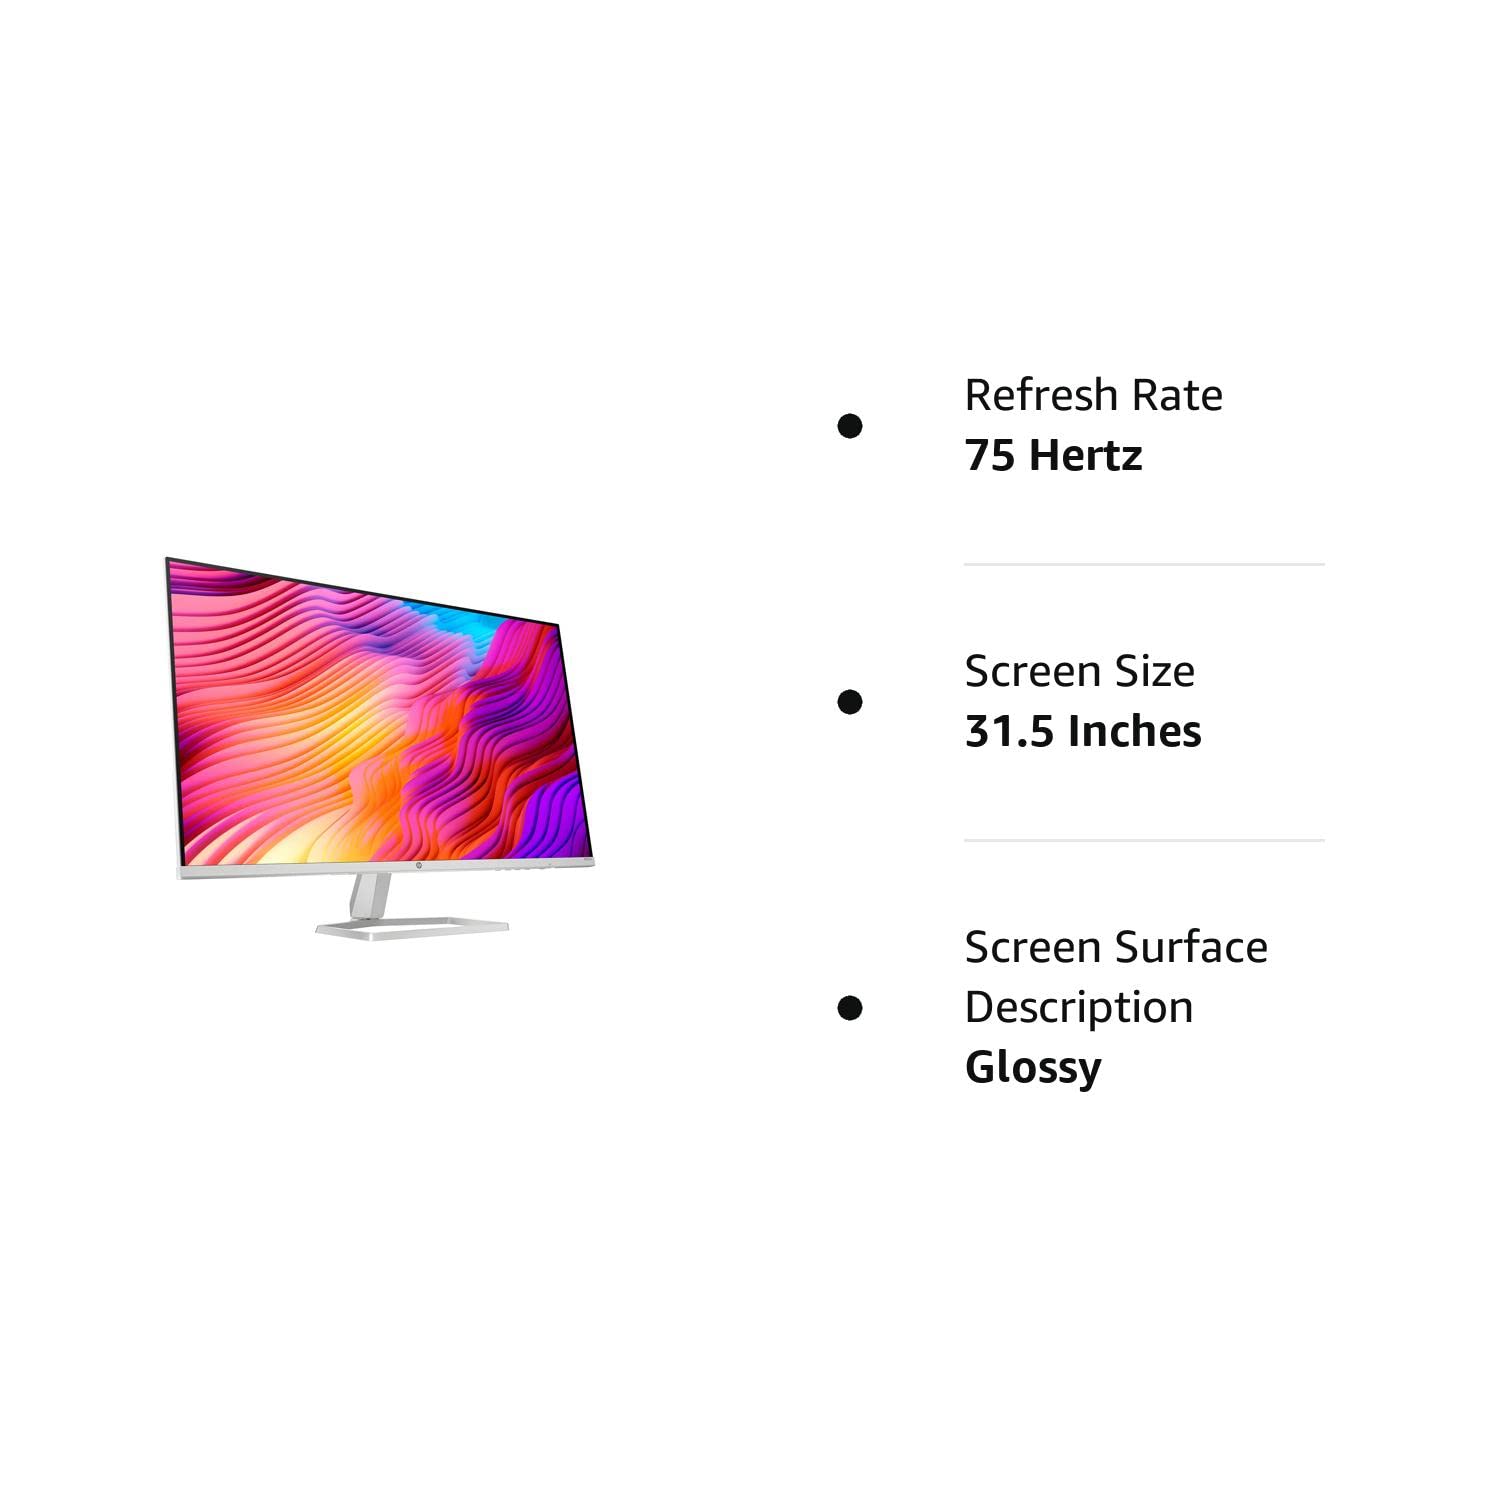 HP M32fw FHD Monitor, Full HD (1920 x 1080), AMD FreeSync 31.5 Inches, Ceramic white with silver stand